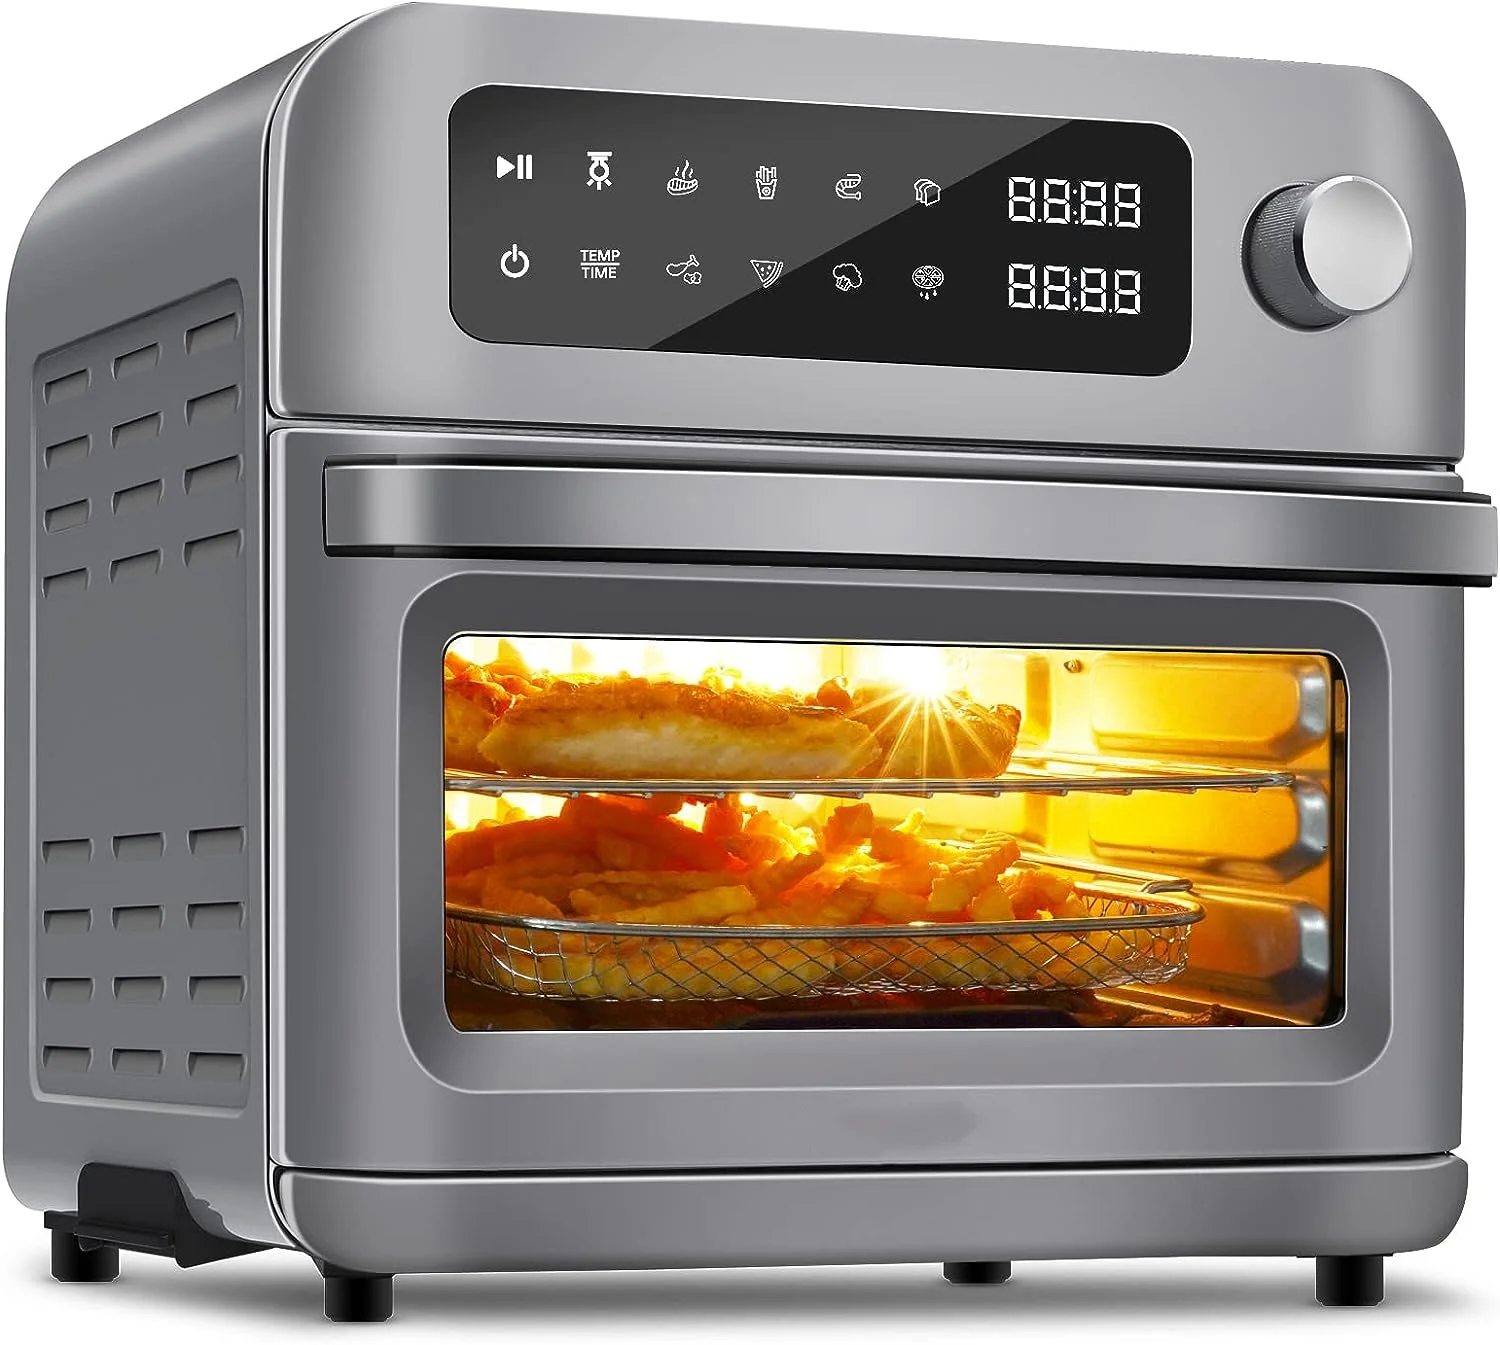 https://ae01.alicdn.com/kf/S63a3e3dd3a0f48d0ba456da0a9bfb3cd1/Air-Fryer-Toaster-Oven-1700w-High-Power-AirFryer-Dehydrator-Combo-with-Touchscreen-Convection-Countertop-Oven-Dishwasher.png